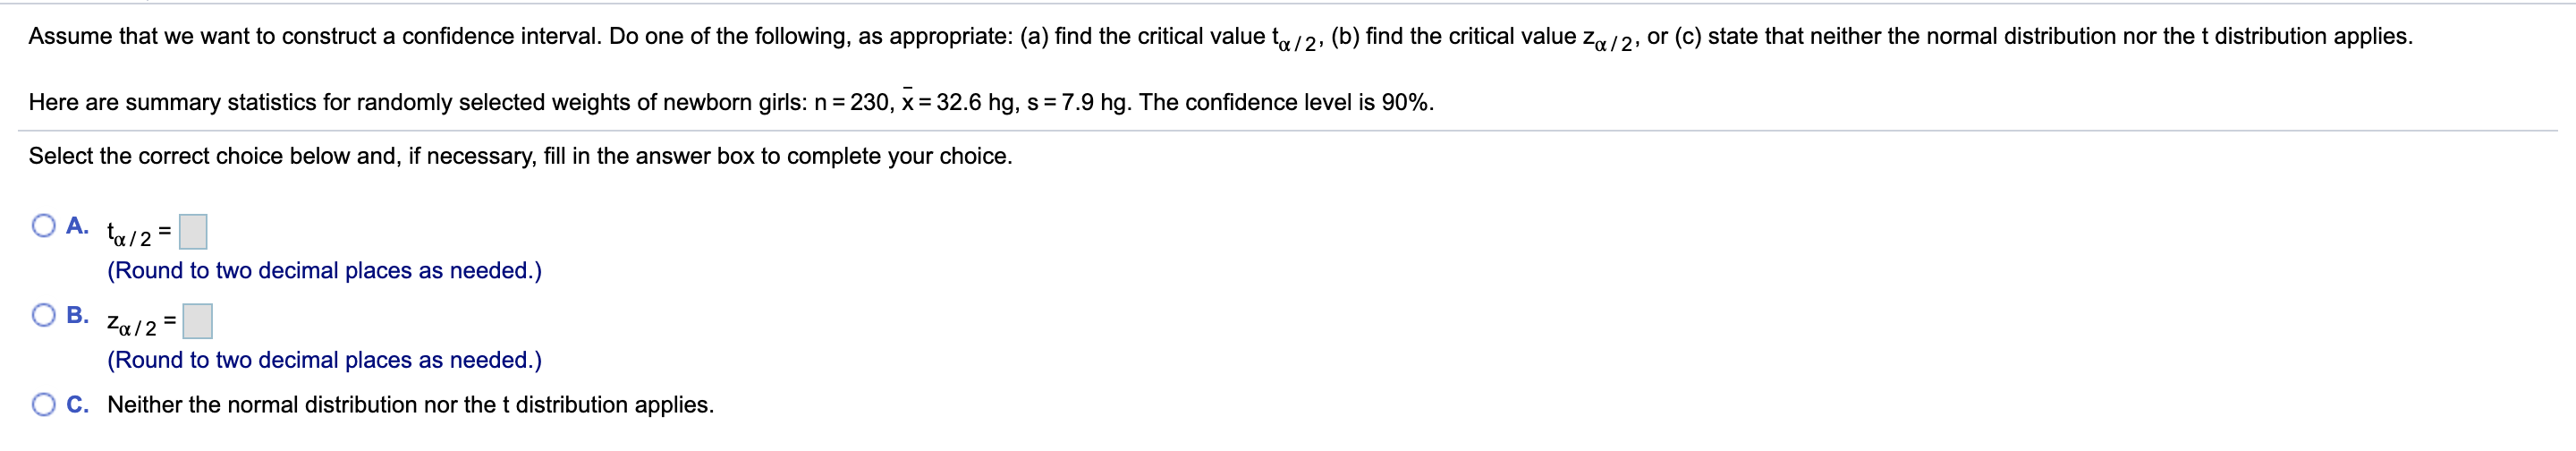 Assume that we want to construct a confidence interval. Do one of the following, as appropriate: (a) find the critical value t/2, (b) find the critical value z,/2, or (c) state that neither the normal distribution nor the t distribution applies.
230, x 32.6 hg, s = 7.9 hg. The confidence level is 90%
Here are summary statistics for randomly selected weights of newborn girls: n
Select the correct choice below and, if necessary, fill in the answer box to complete your choice.
A.
(Round to two decimal places as needed.)
В.
Za/2
(Round to two decimal places as needed.)
C. Neither the normal distribution nor the t distribution applies.
